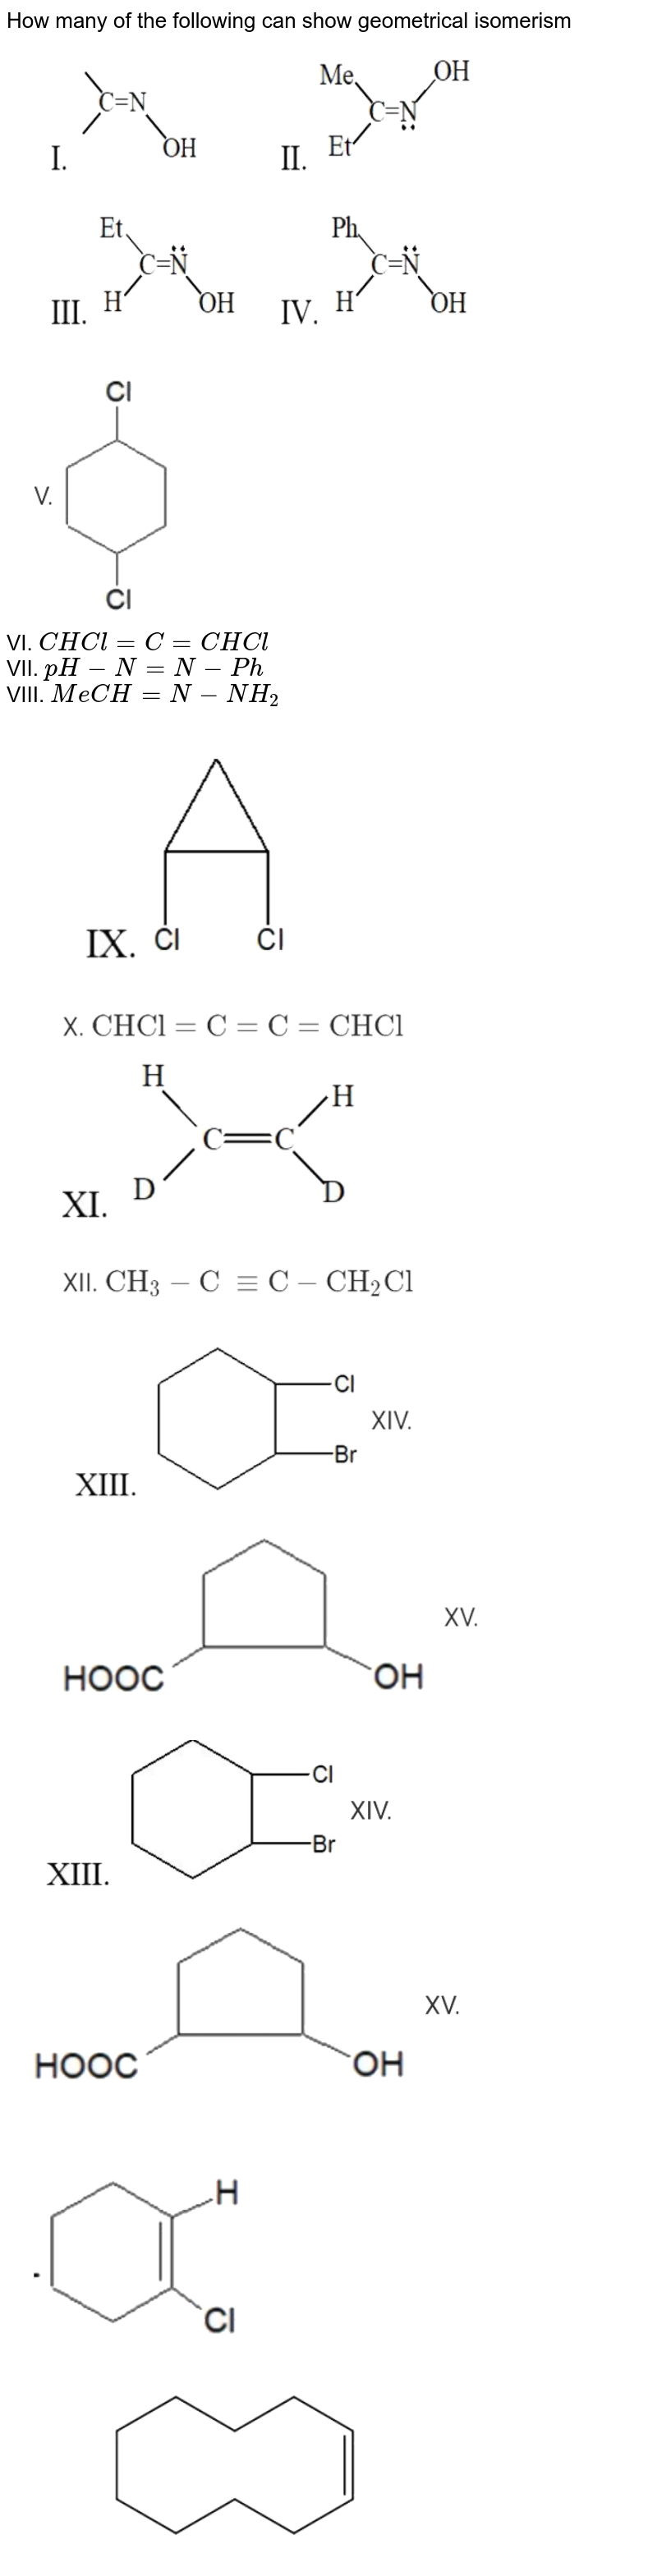 How many of the following can show geometrical isomerism <br> <img src="https://d10lpgp6xz60nq.cloudfront.net/physics_images/NTA_JEE_MOK_TST_43_E02_021_Q01.png" width="80%"> <br> VI. `CHCl=C=CHCl` <br> VII. `pH-N=N-Ph` <br> VIII. `MeCH=N-NH_(2)` <br> <img src="https://d10lpgp6xz60nq.cloudfront.net/physics_images/NTA_JEE_MOK_TST_43_E02_021_Q02.png" width="80%">  <br> <img src="https://d10lpgp6xz60nq.cloudfront.net/physics_images/NTA_JEE_MOK_TST_43_E02_021_Q03.png" width="80%"> 